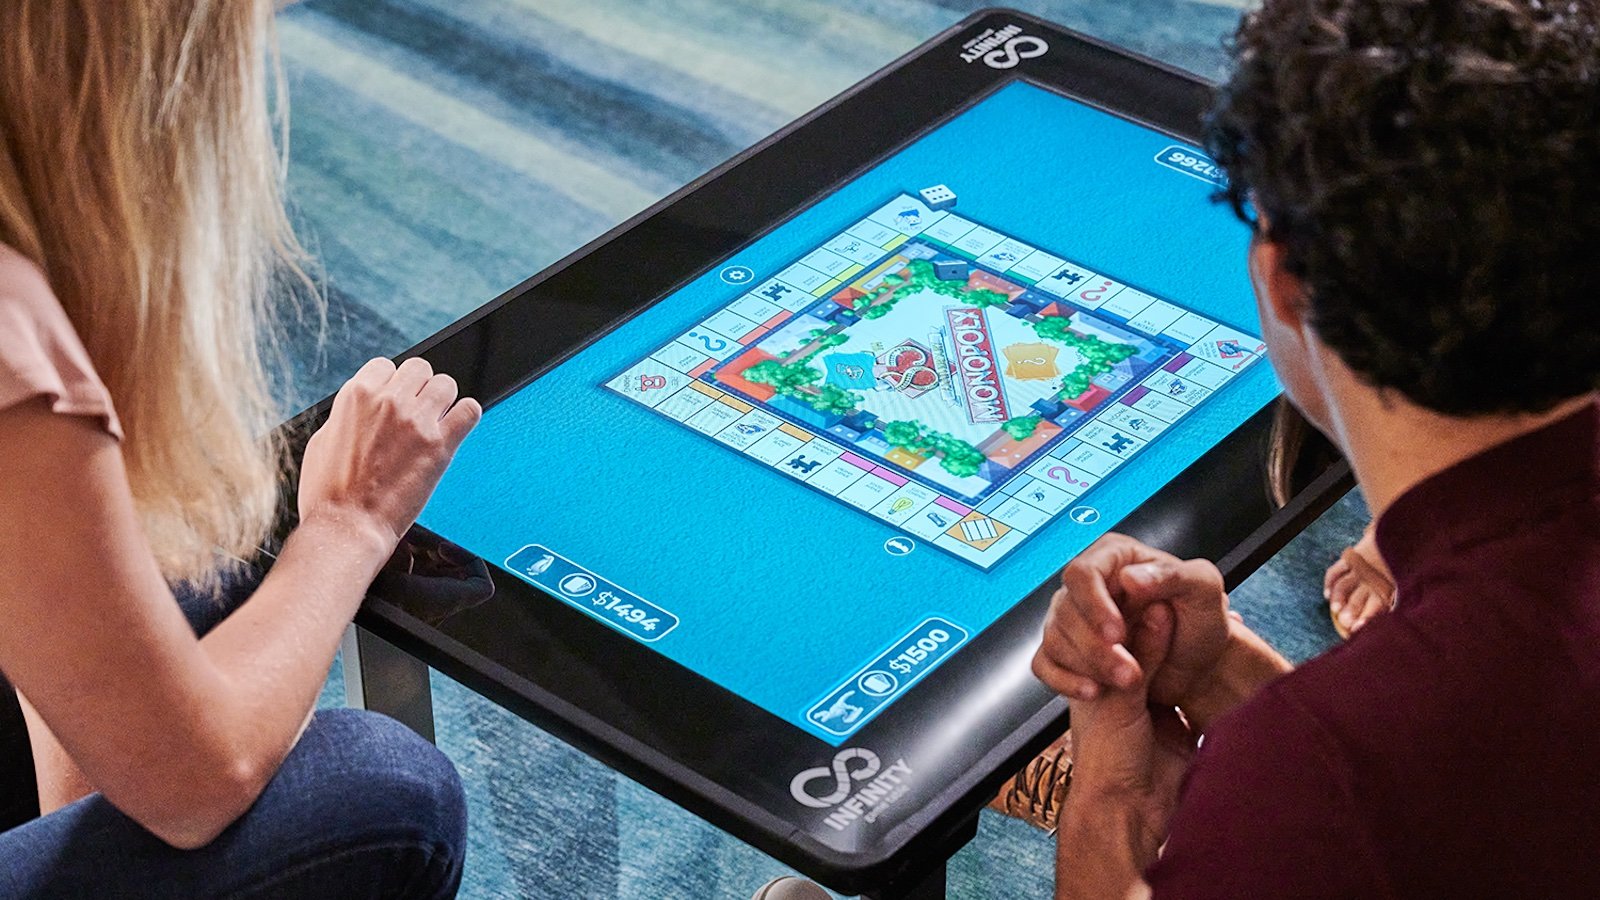 Arcade1Up Infinity Game Table features a high-resolution touchscreen